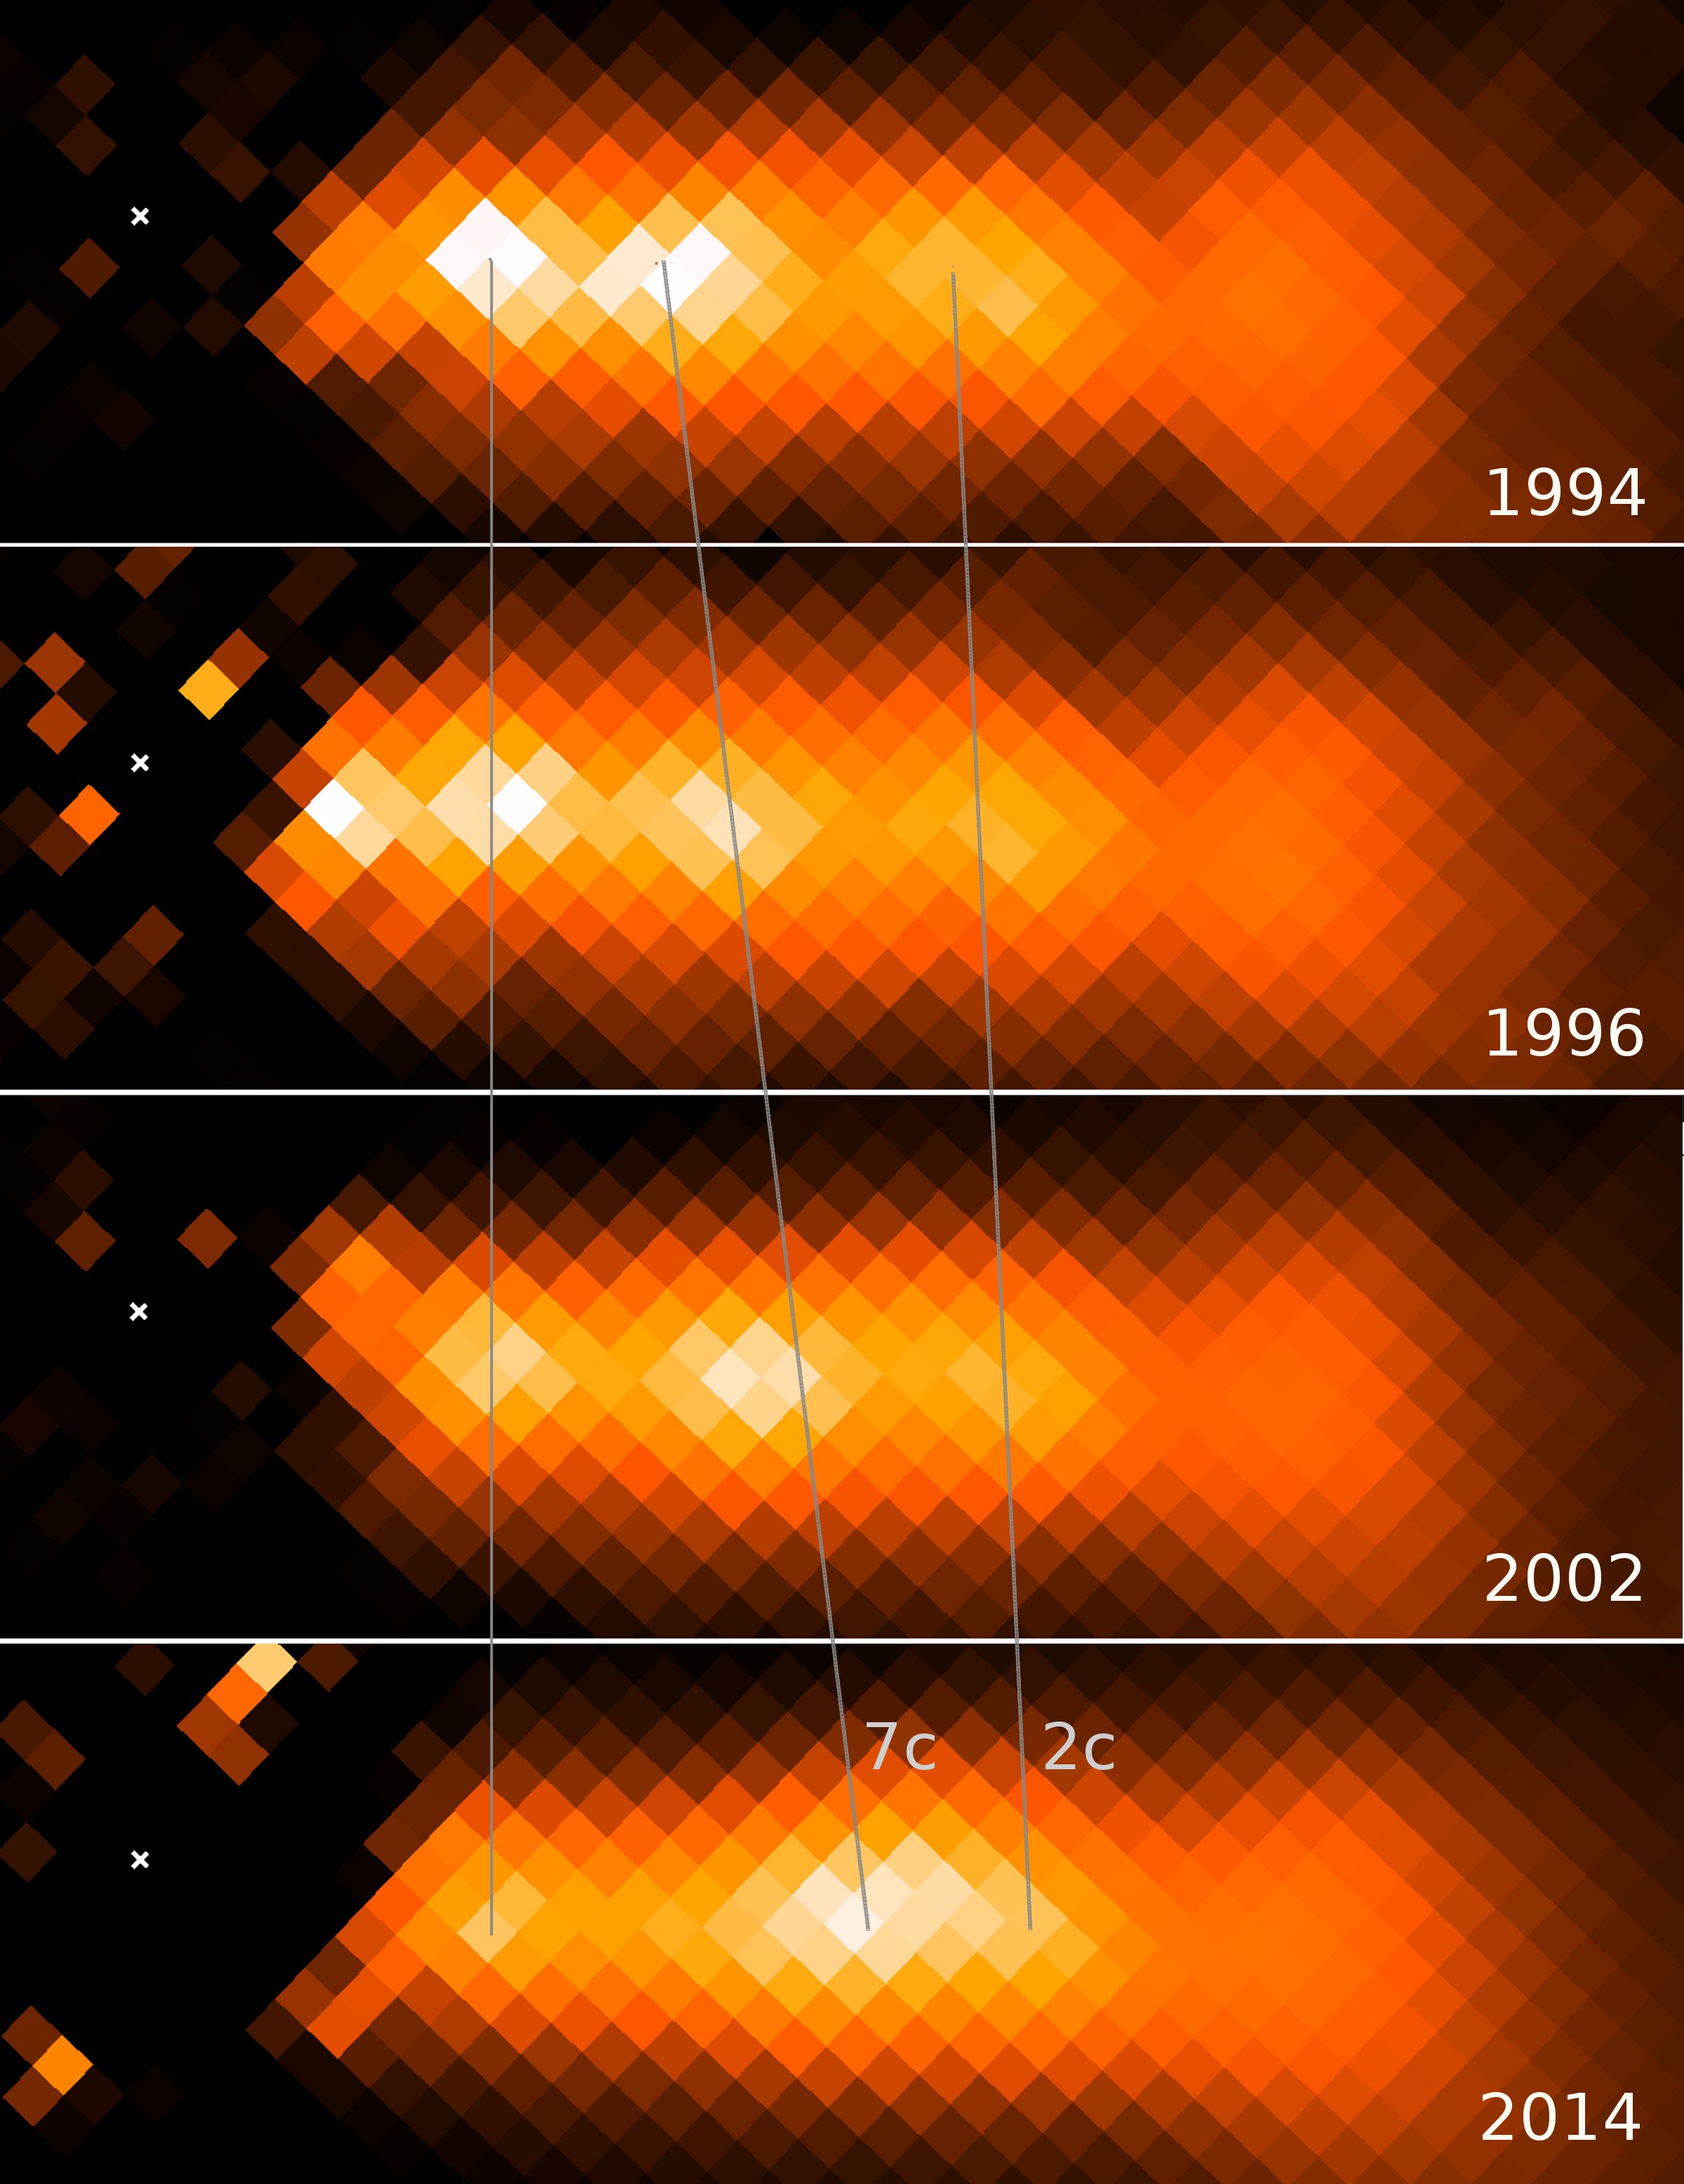 A series of optical images taken by Hubble of a 1300 lightyear-long jet from the super-massive black hole at the center of nearby elliptical galaxy NGC 3862 reveals dramatic changes over 20 years. The bright central knot in the jet appears to move with a speed seven times the speed of light, and is in the process of colliding with a slower-moving downstream knot. The subsequent brightening of both knots indicates that particle acceleration may be taking place as a result of an internal shock collision, a model which has been proposed to explain high-energy radiation from jets of black holes from a few to billions of times the mass of our sun. (from Meyer et al., 2015, Nature)